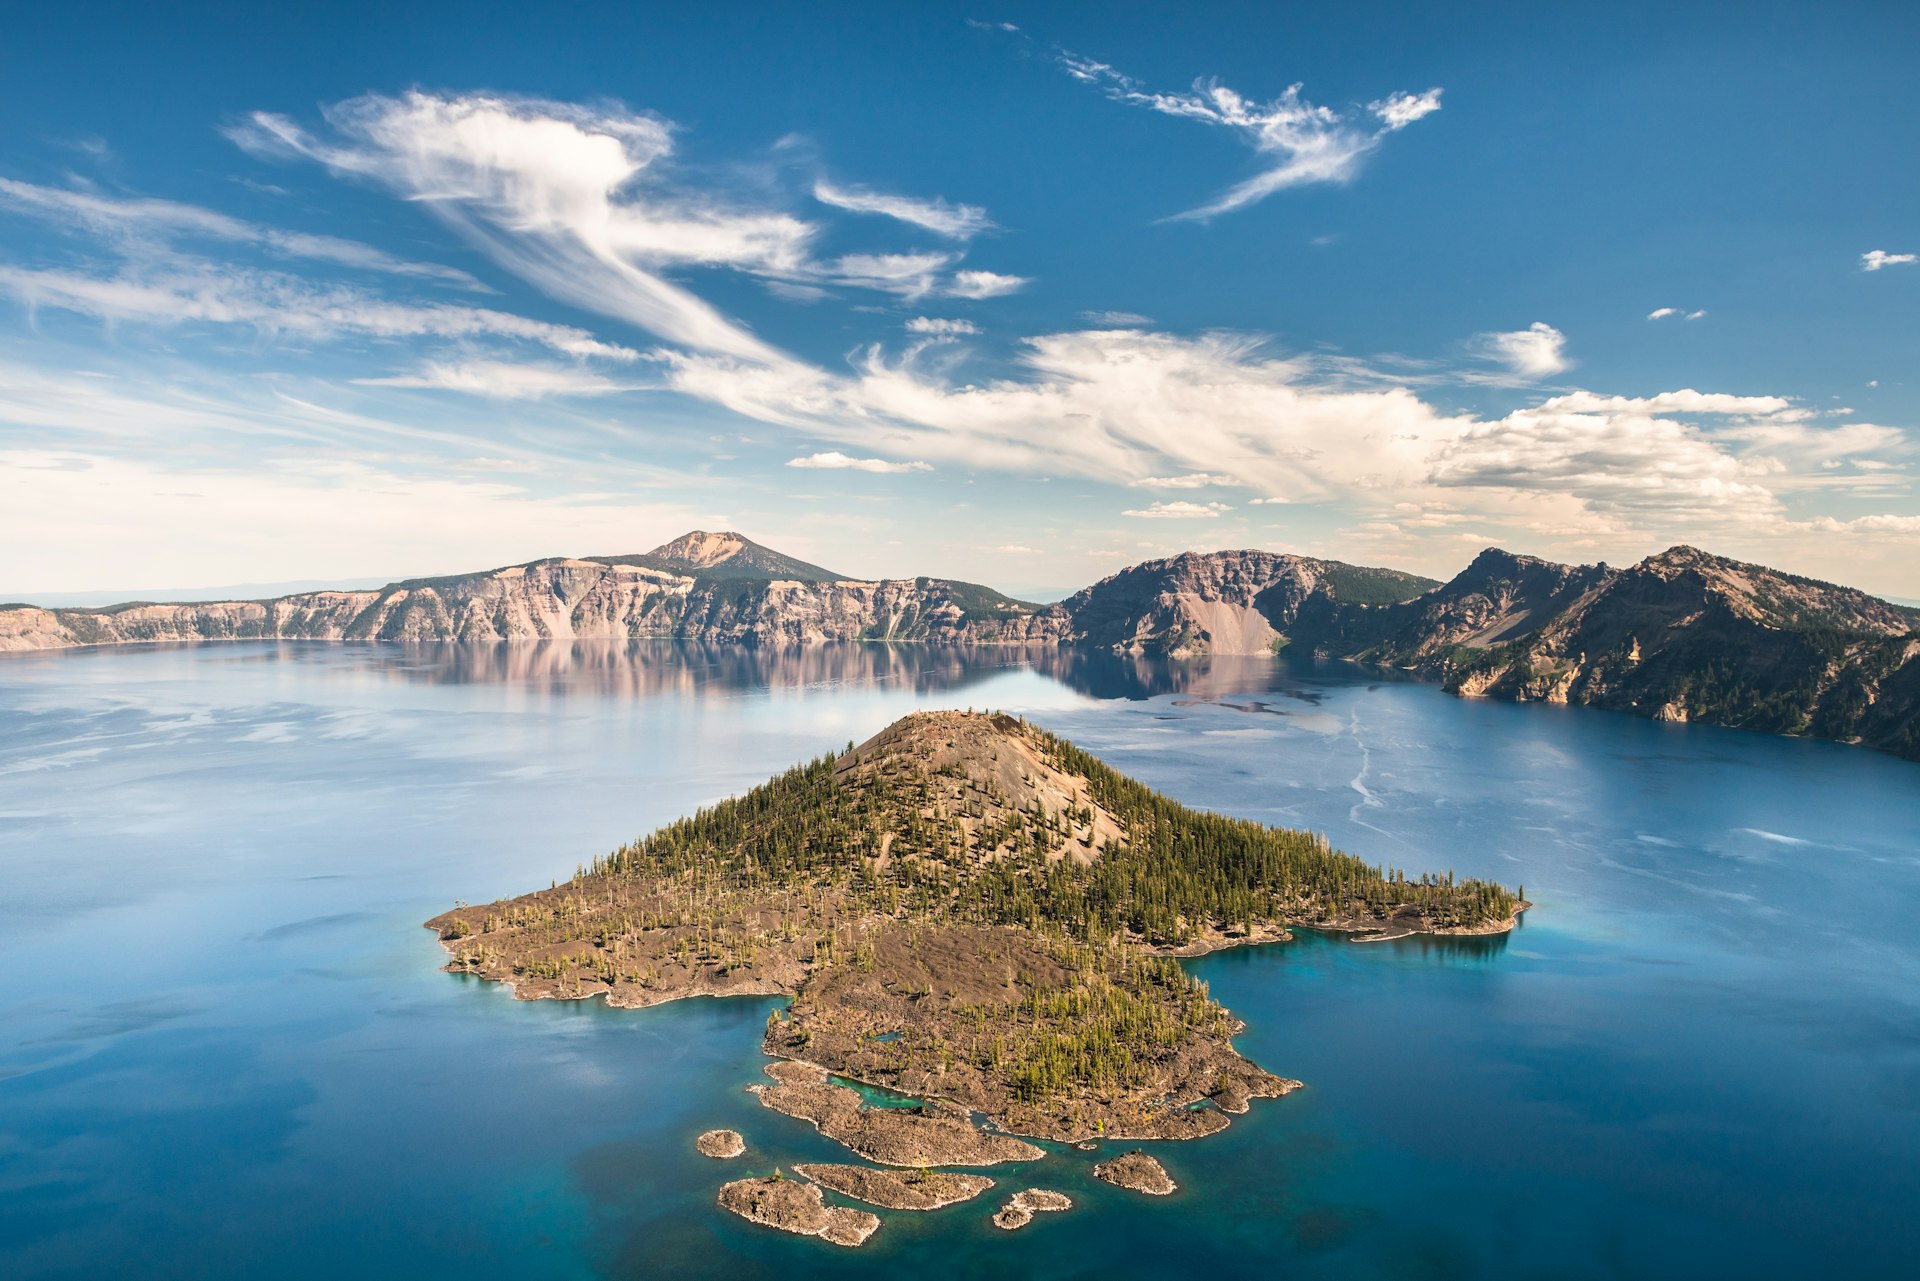 The tree-covered Wizard Island in Crater Lake, at Crater Lake National Park on a bright, blue sky day